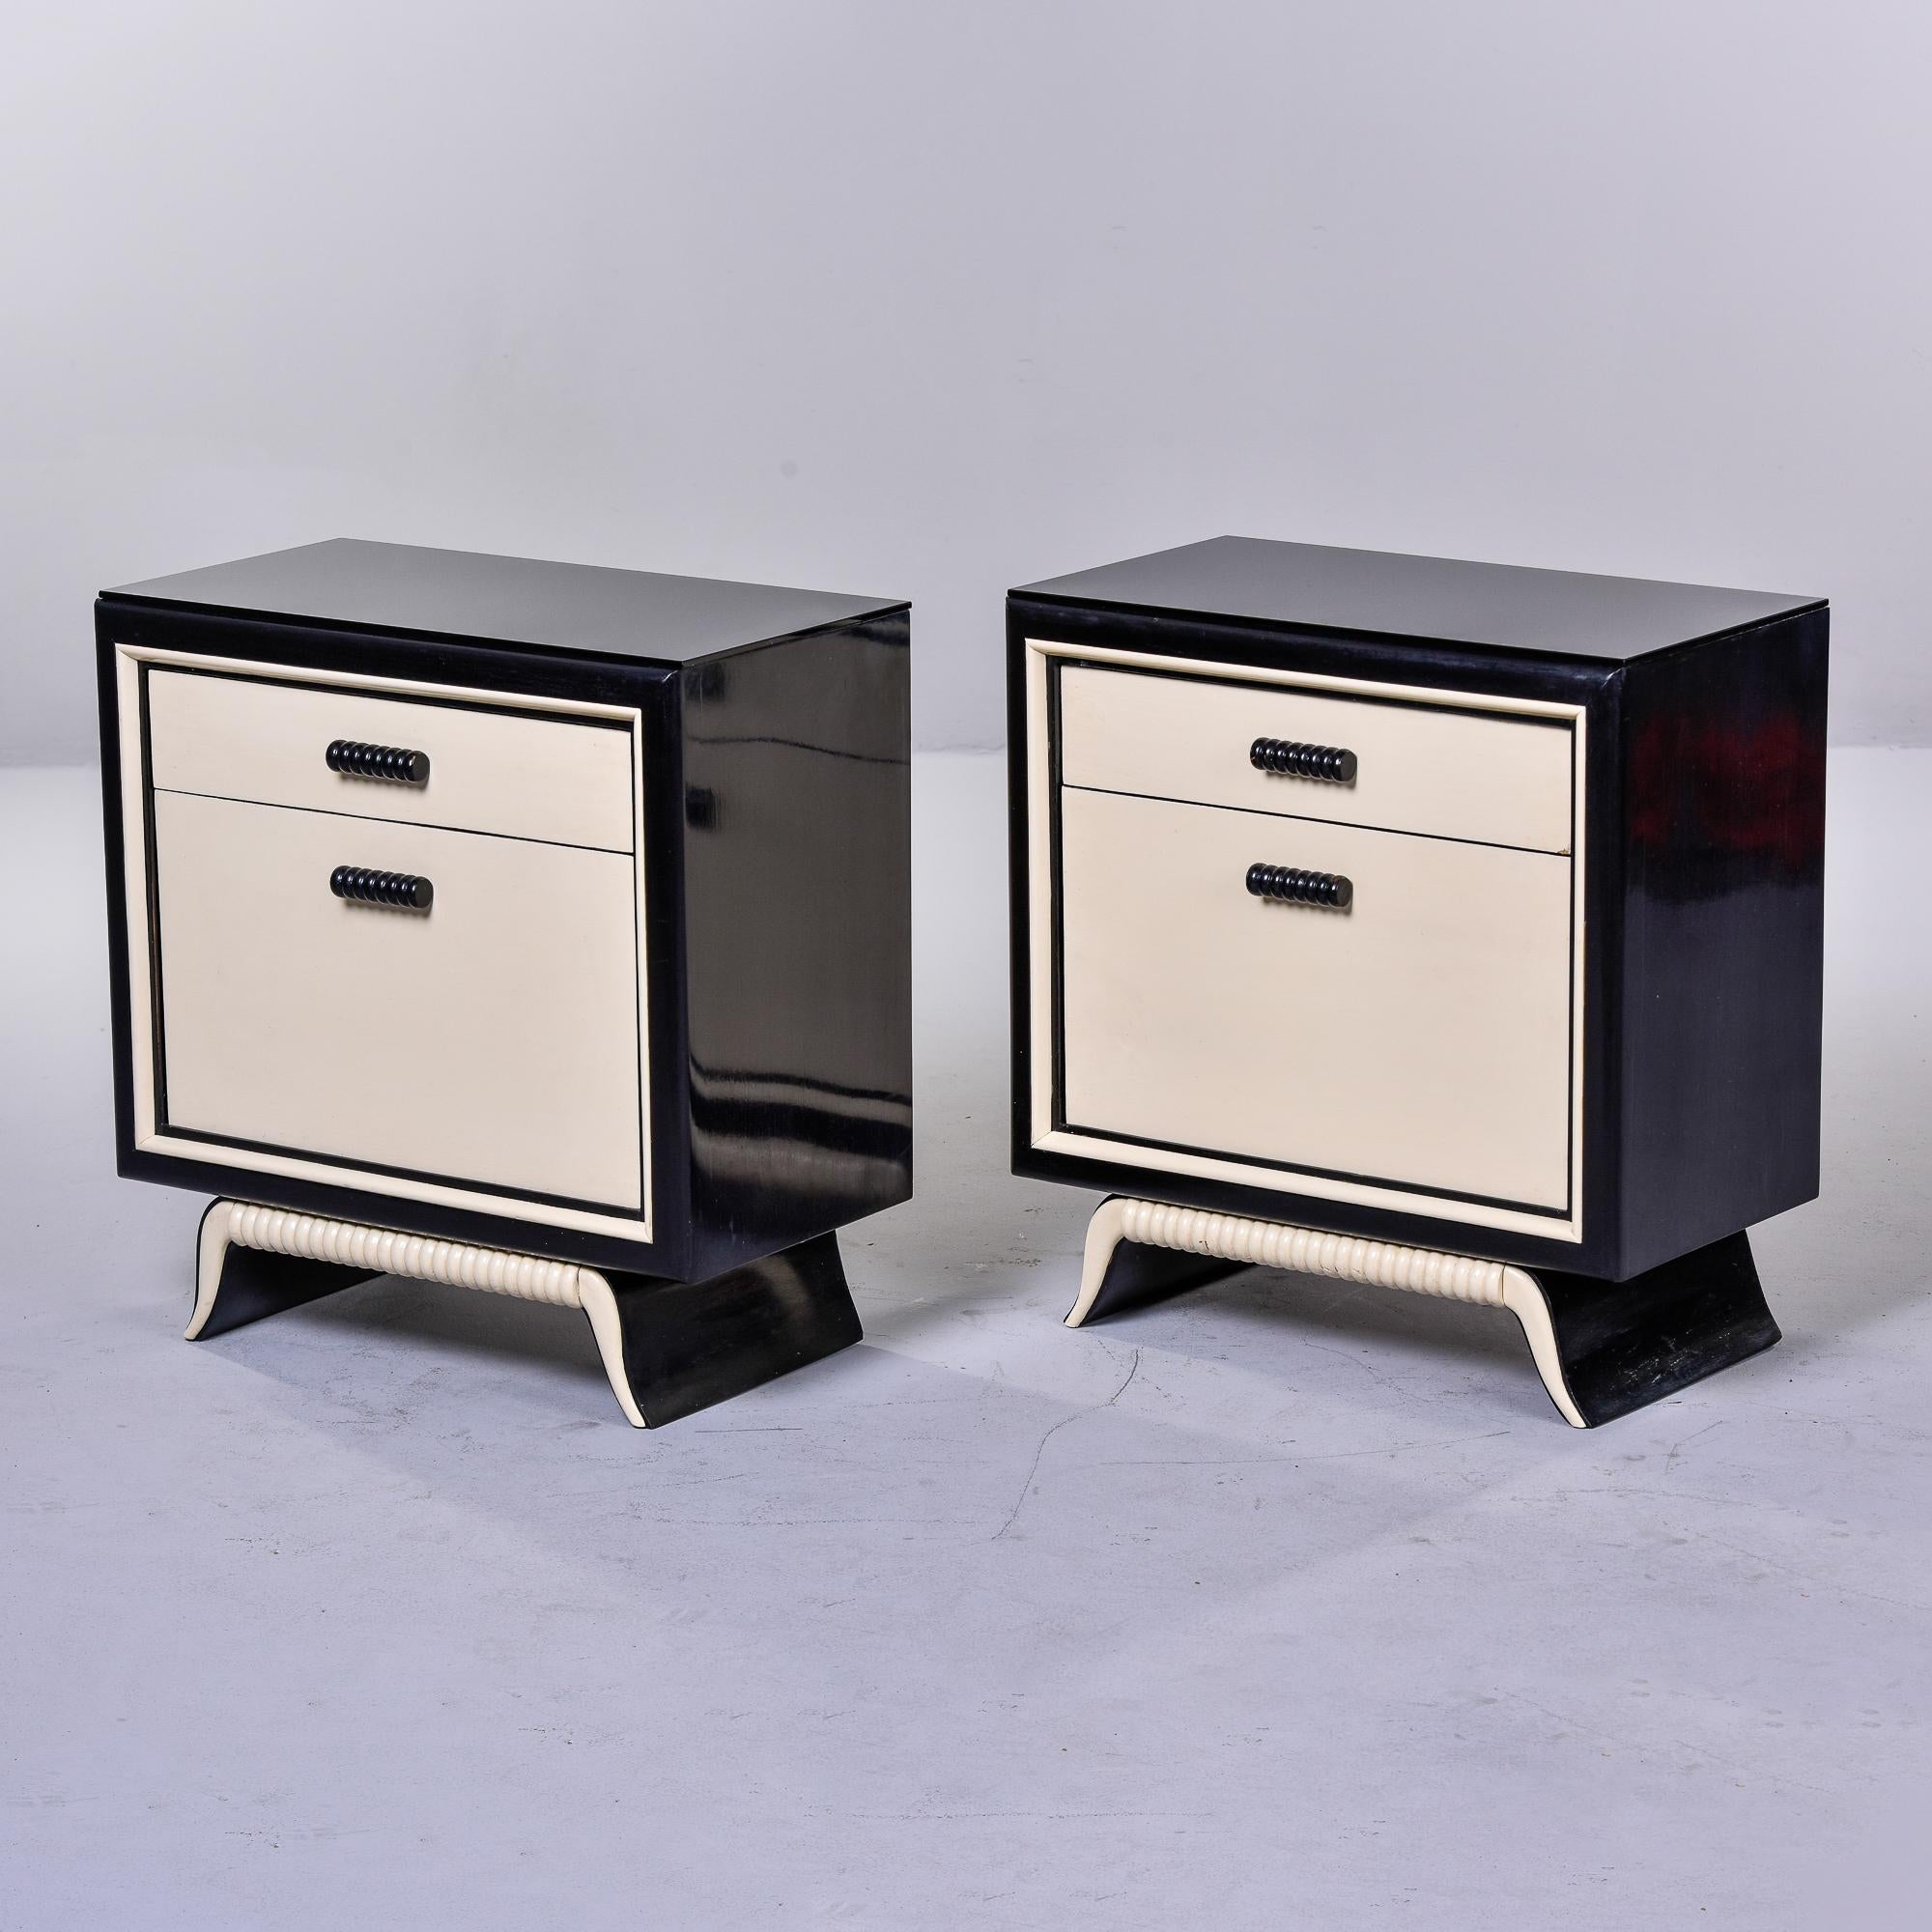 Found in Italy, this pair of circa 1950s bedside cabinets feature a black and cream painted finish. Each cabinet has a functional top drawer over a lower storage compartment with a pull down door. Curvy pedestal base has carved textured details with